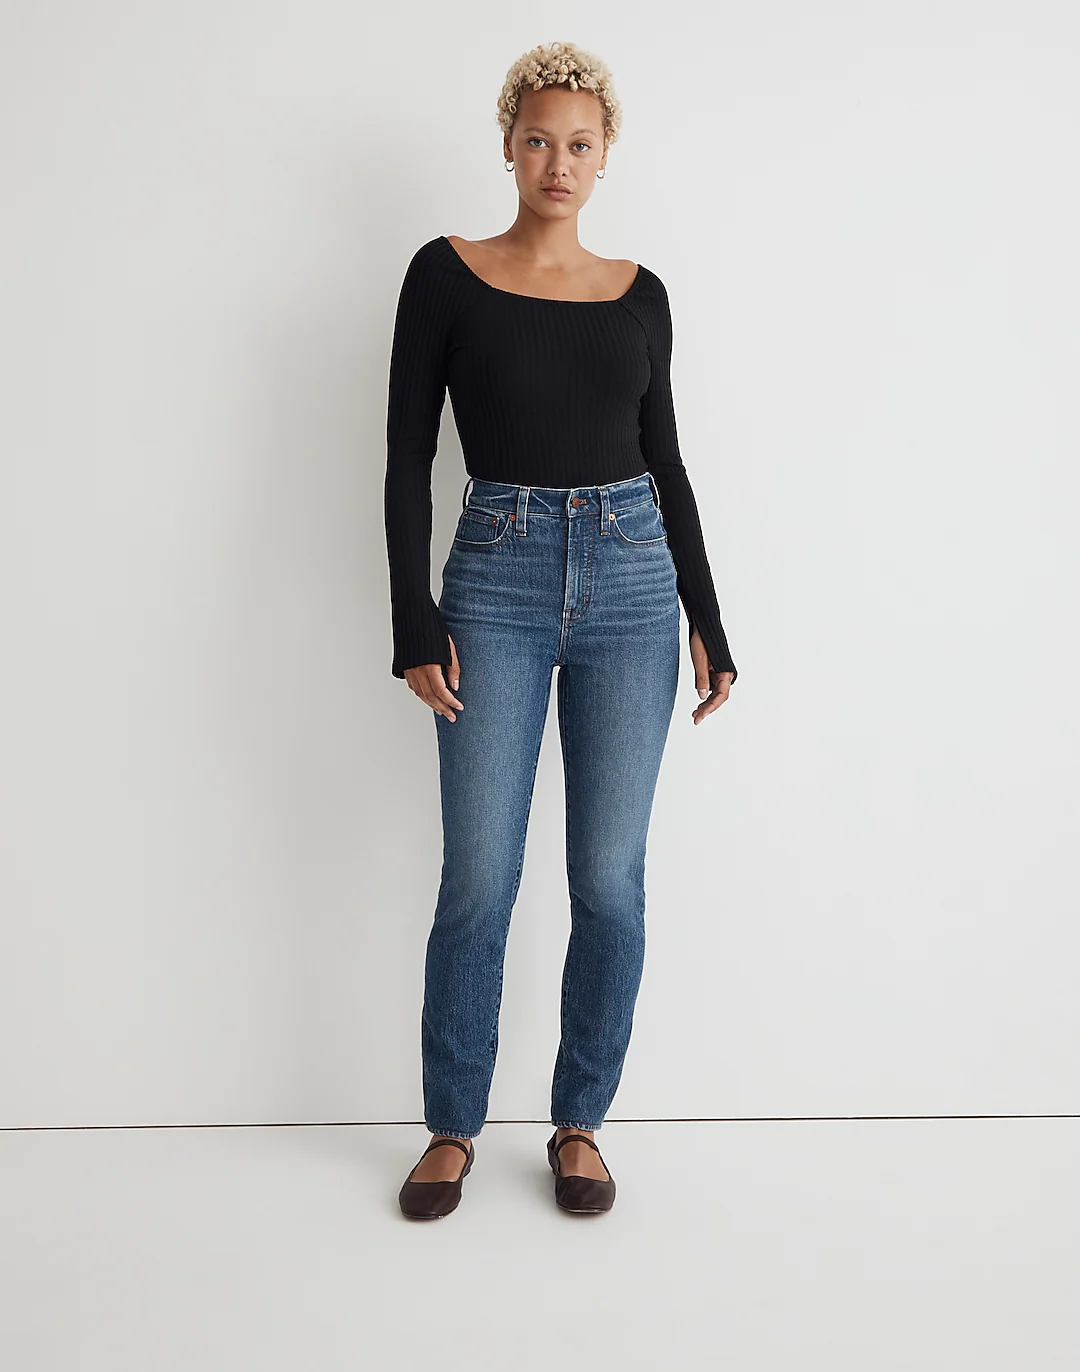 Best curvy jeans that fit and flatter curvy figures can be a challenging quest. With the fashion industry's increasing recognition of diverse body types